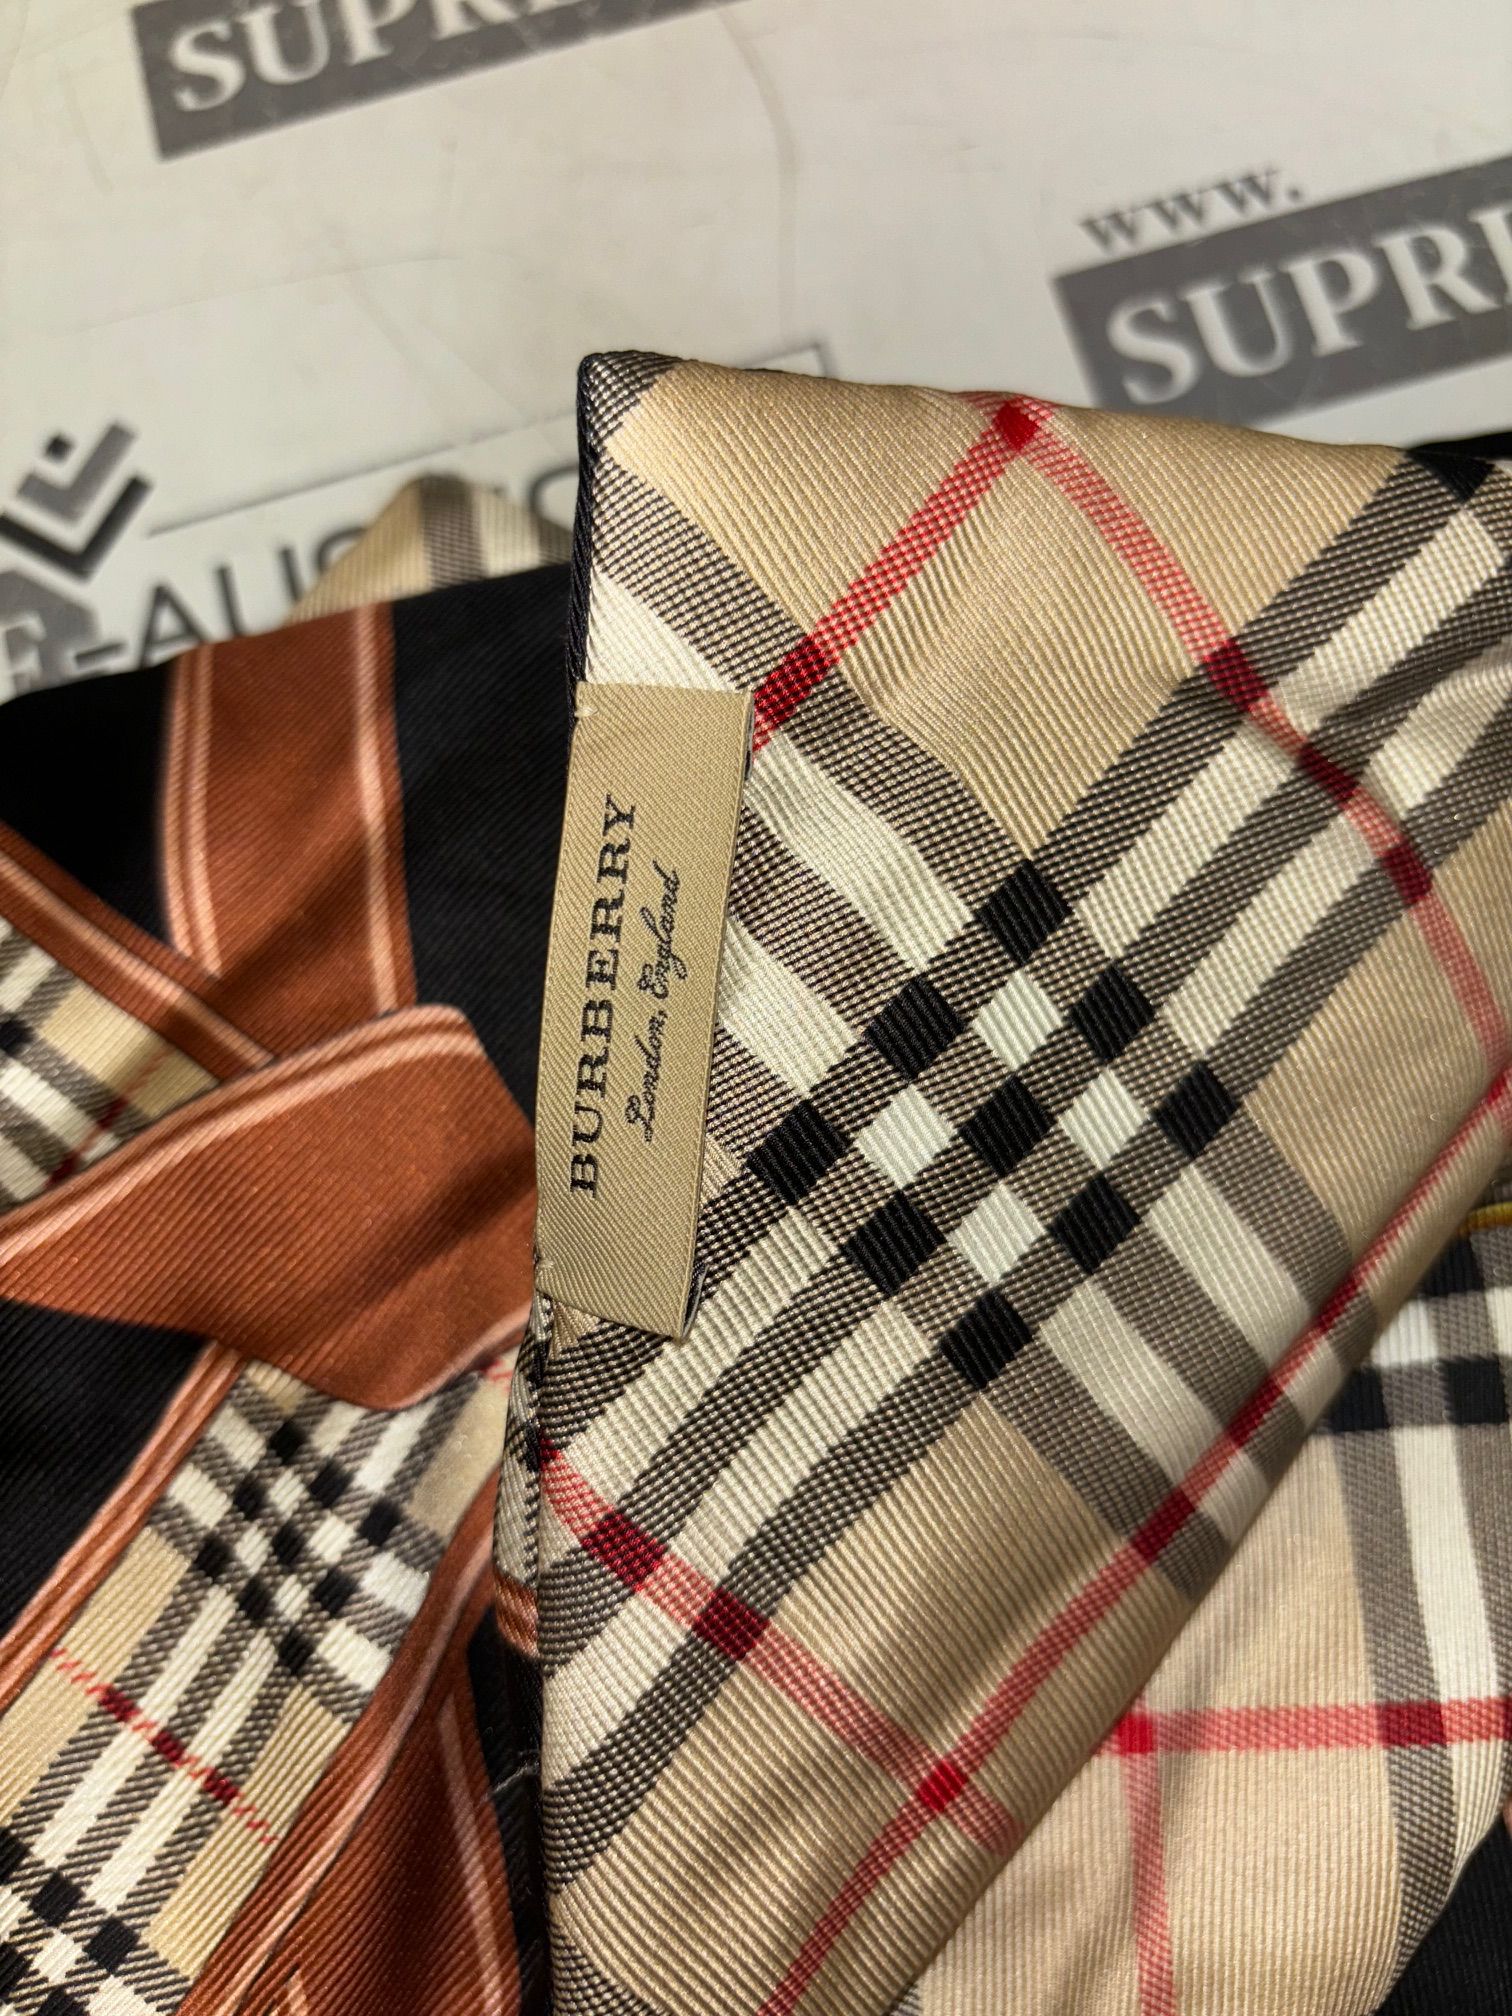 Genuine Burberry archive mulberry padded silk scarf - Image 4 of 5